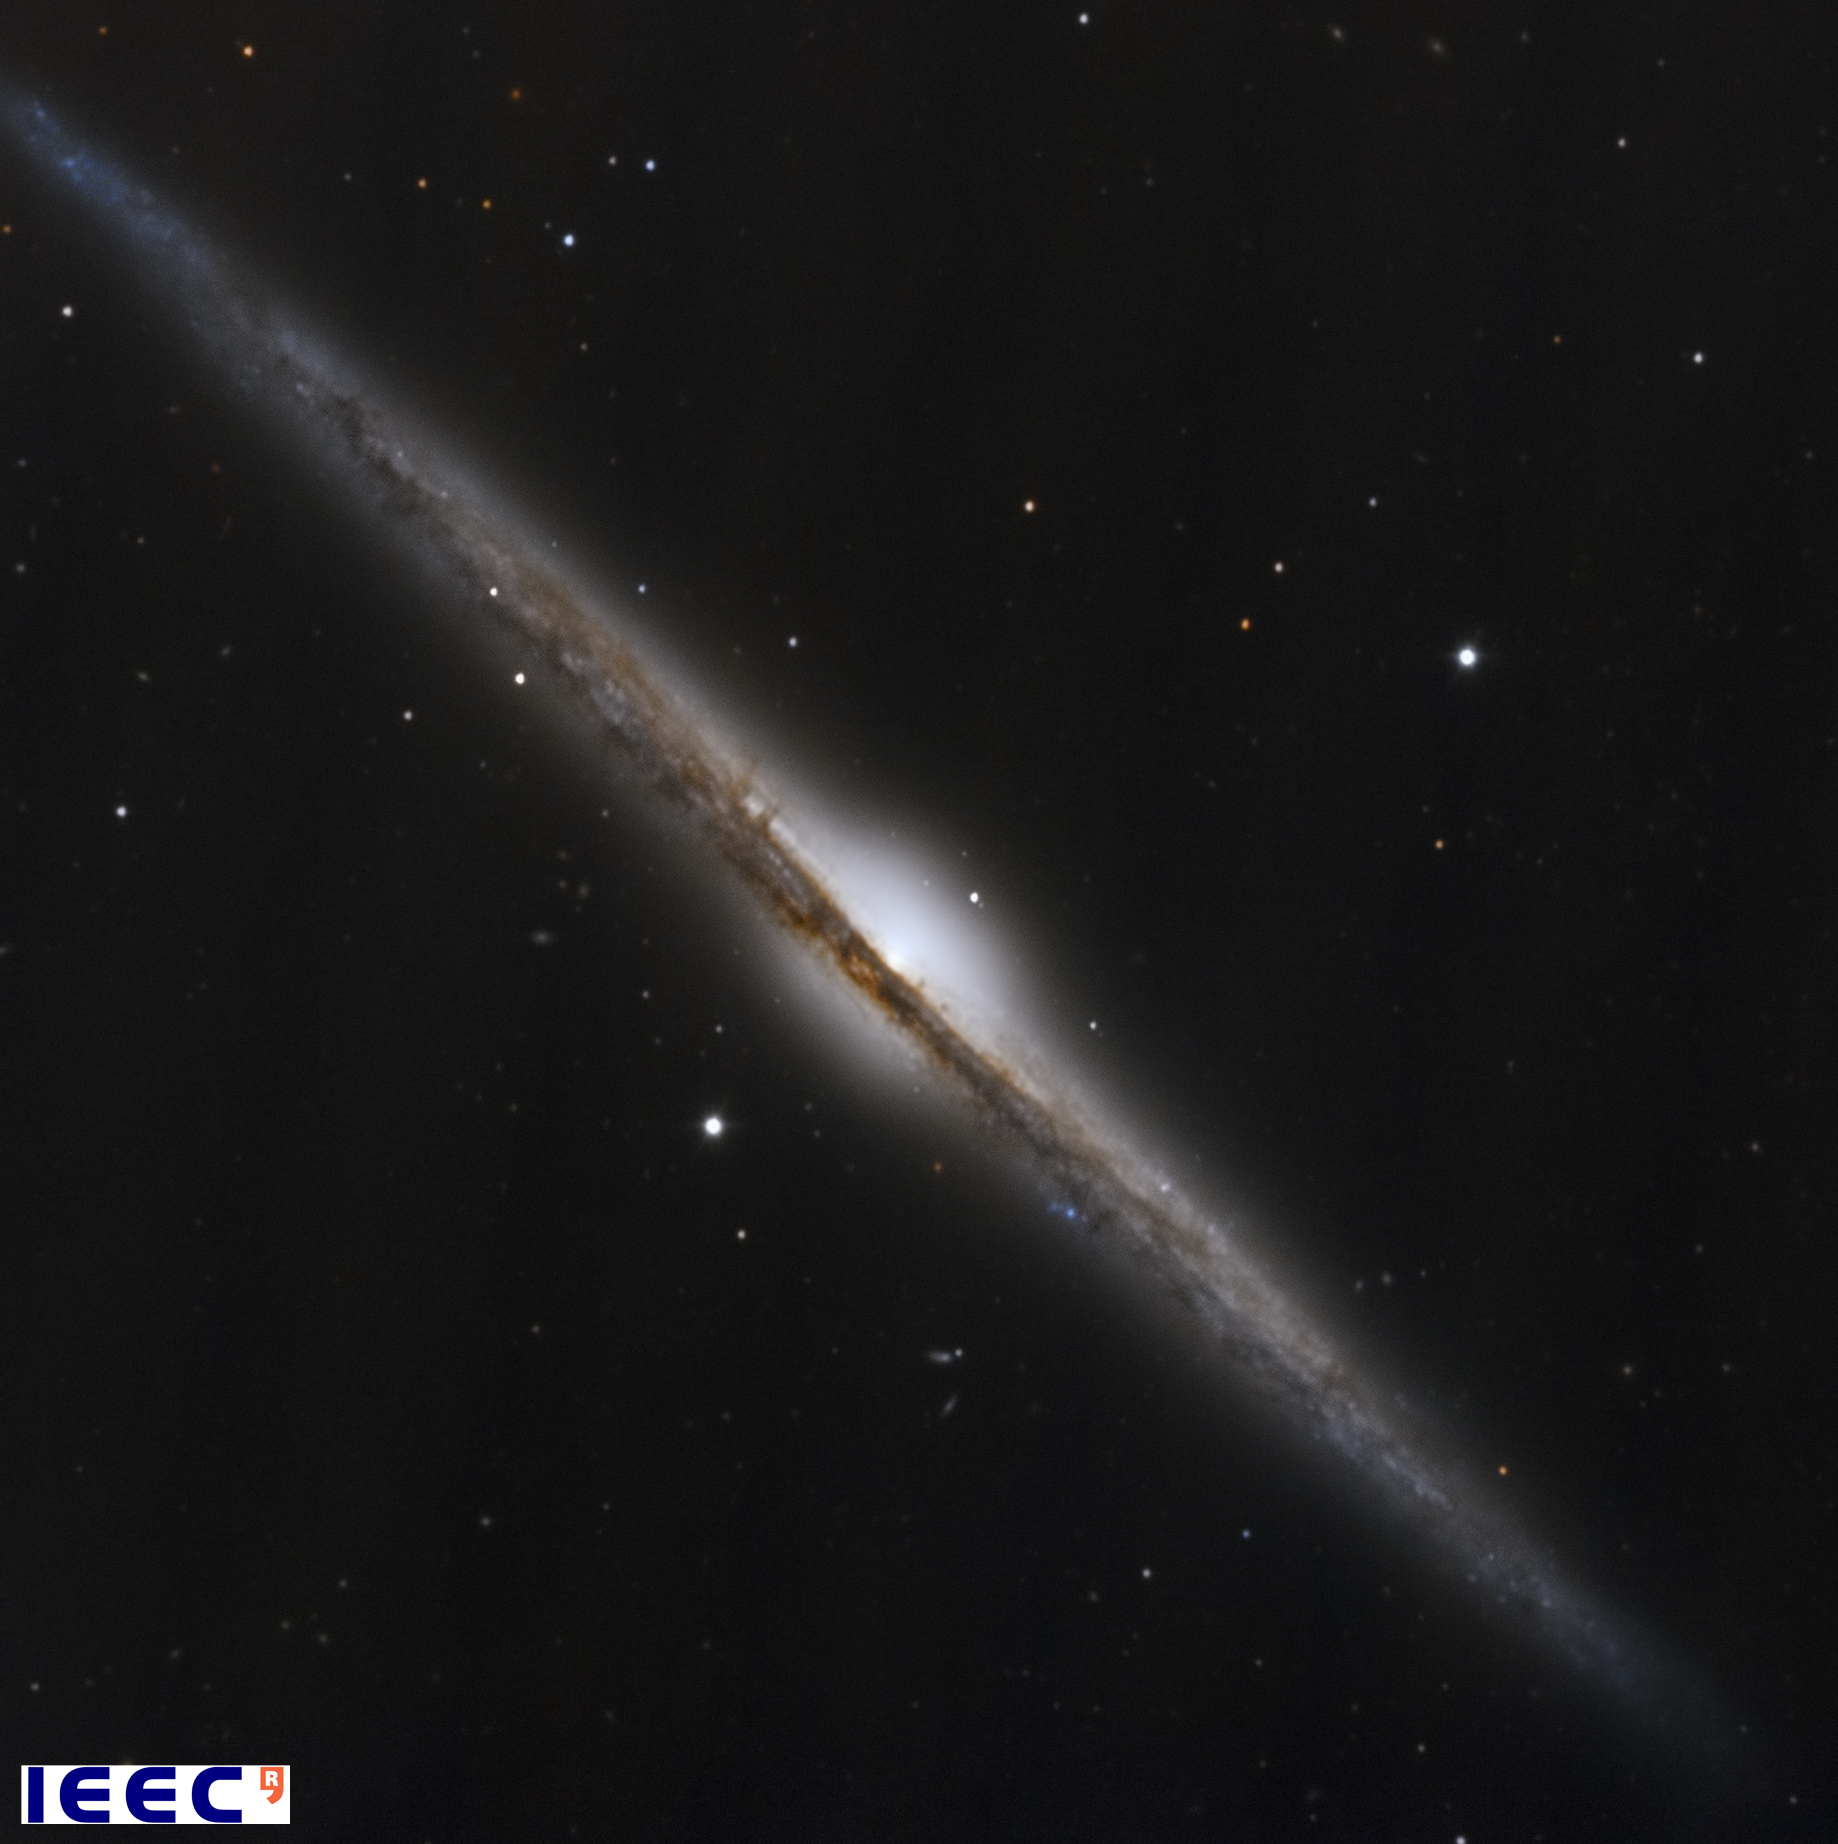 The Needle Galaxy, picture of March of the Observatori Astronòmic del Montsec